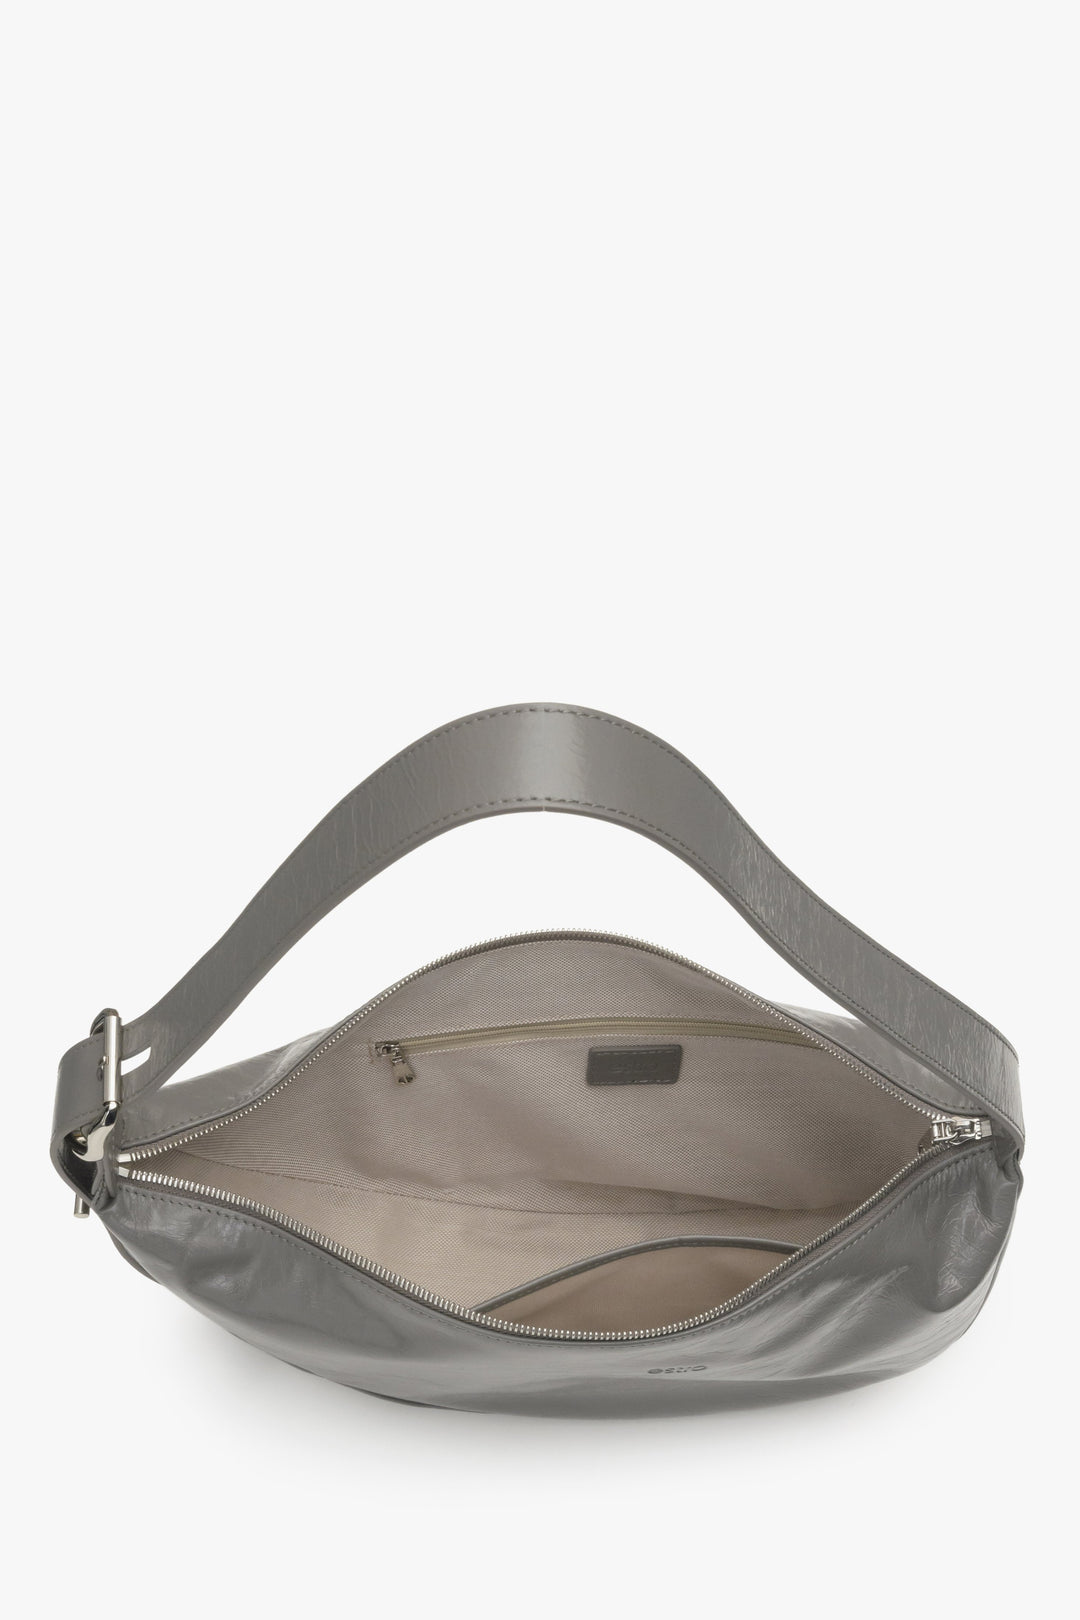 Women's grey leather Estro shoulder bag - close-up on the interior of the model.